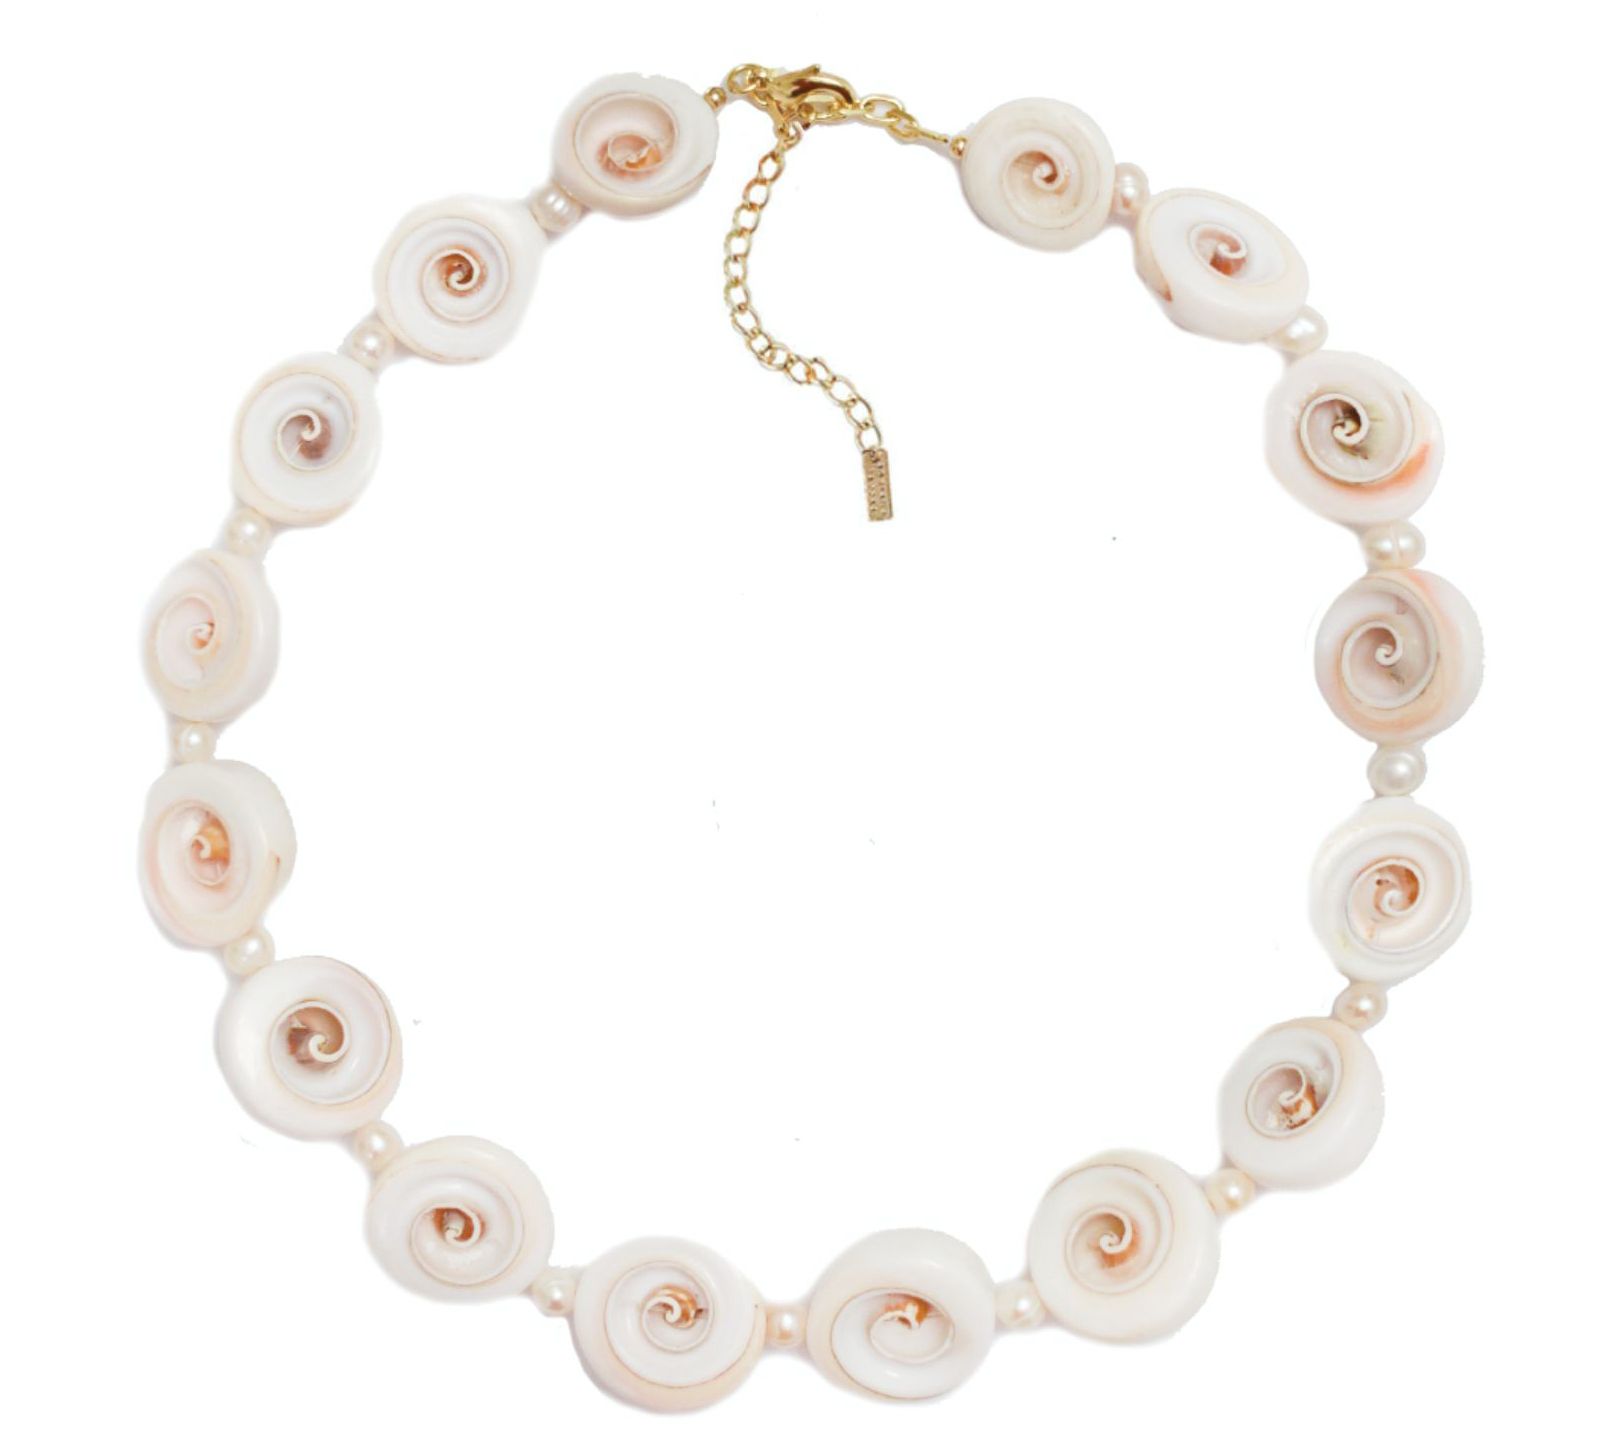 Adriana Pappas Designs Spiral Shell Necklace 